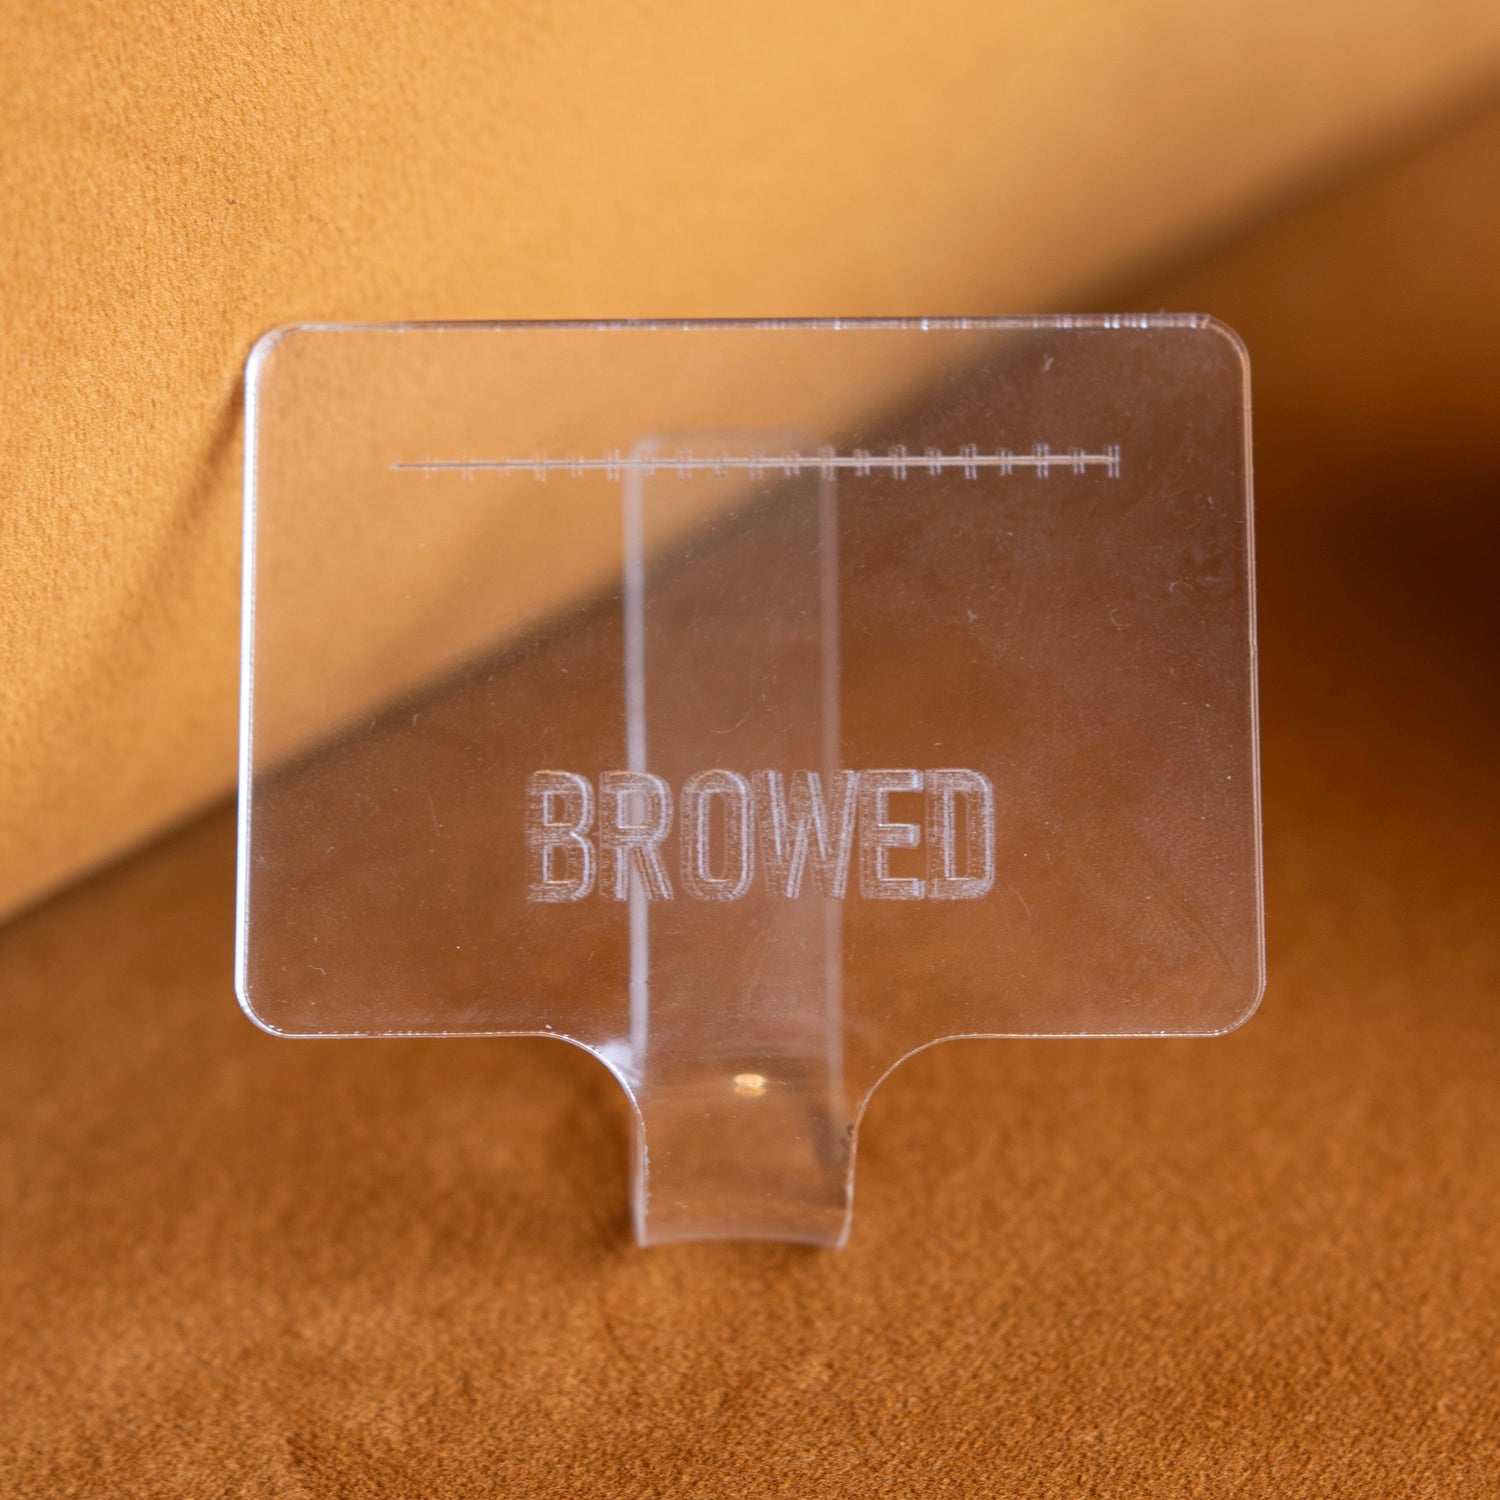 BROWED - Brow Palette for colour mixing